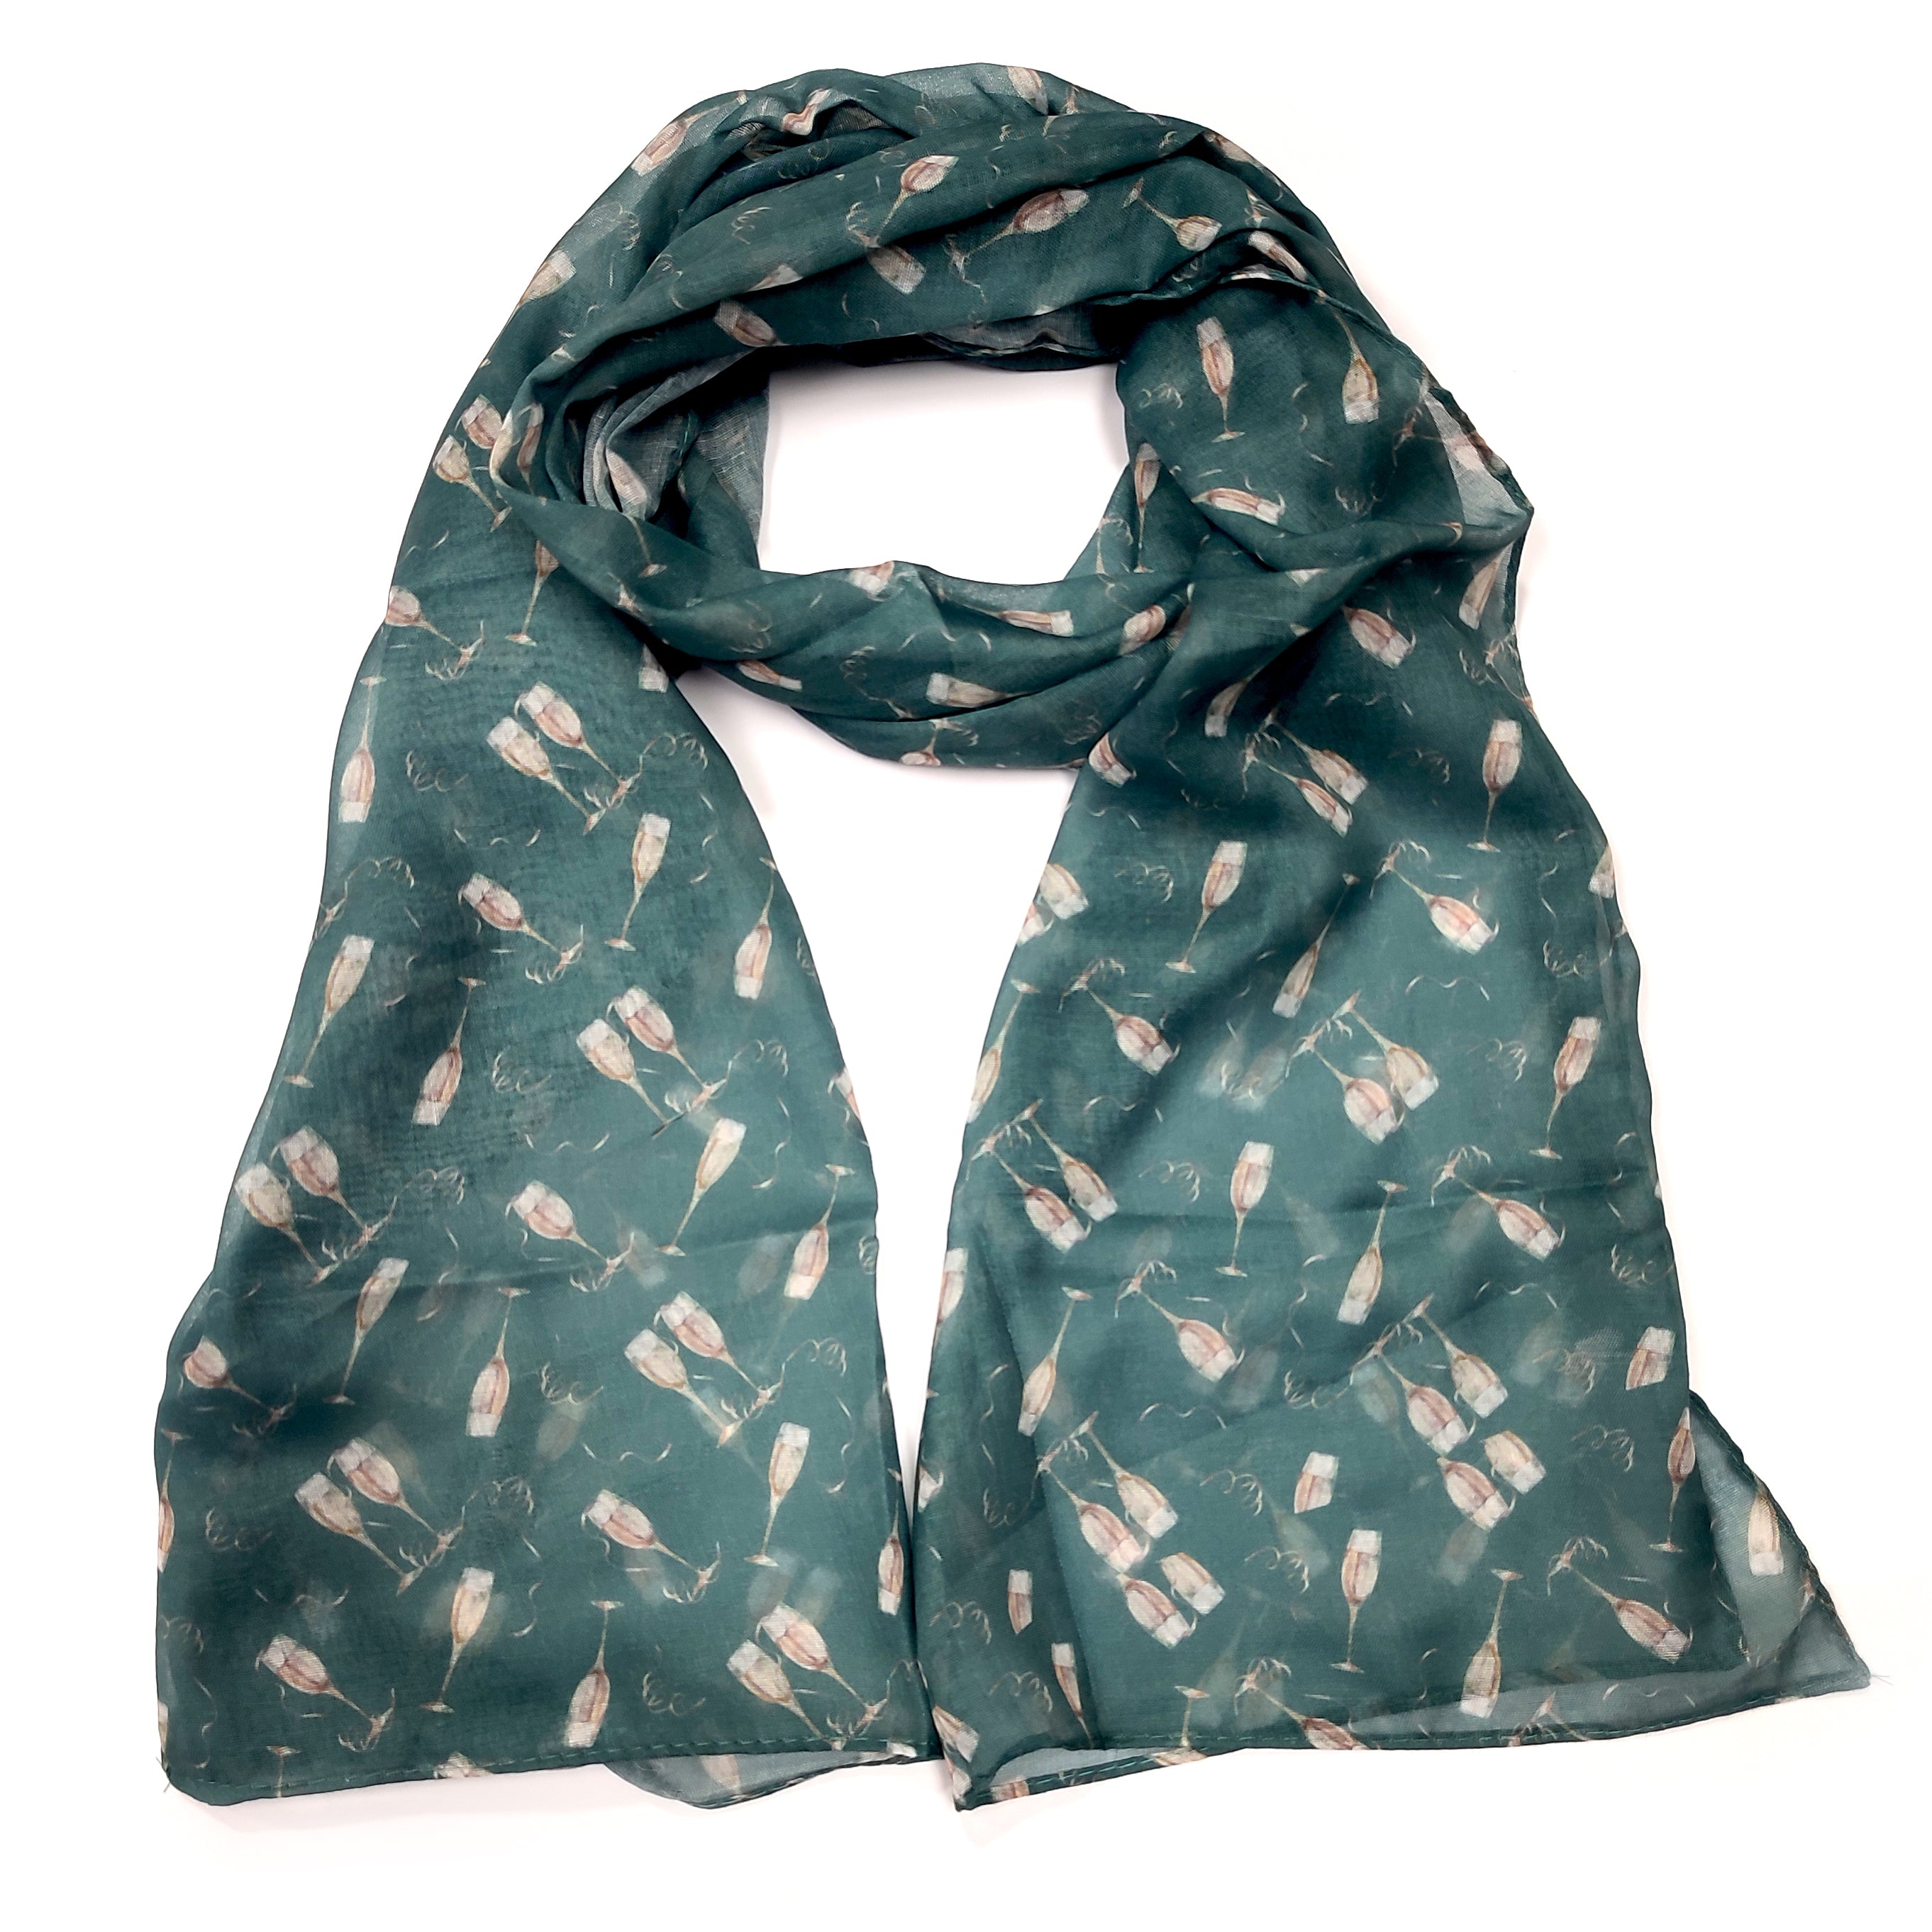 Champagne Party Scarf (50x180cm) - Green - Exclusive Design